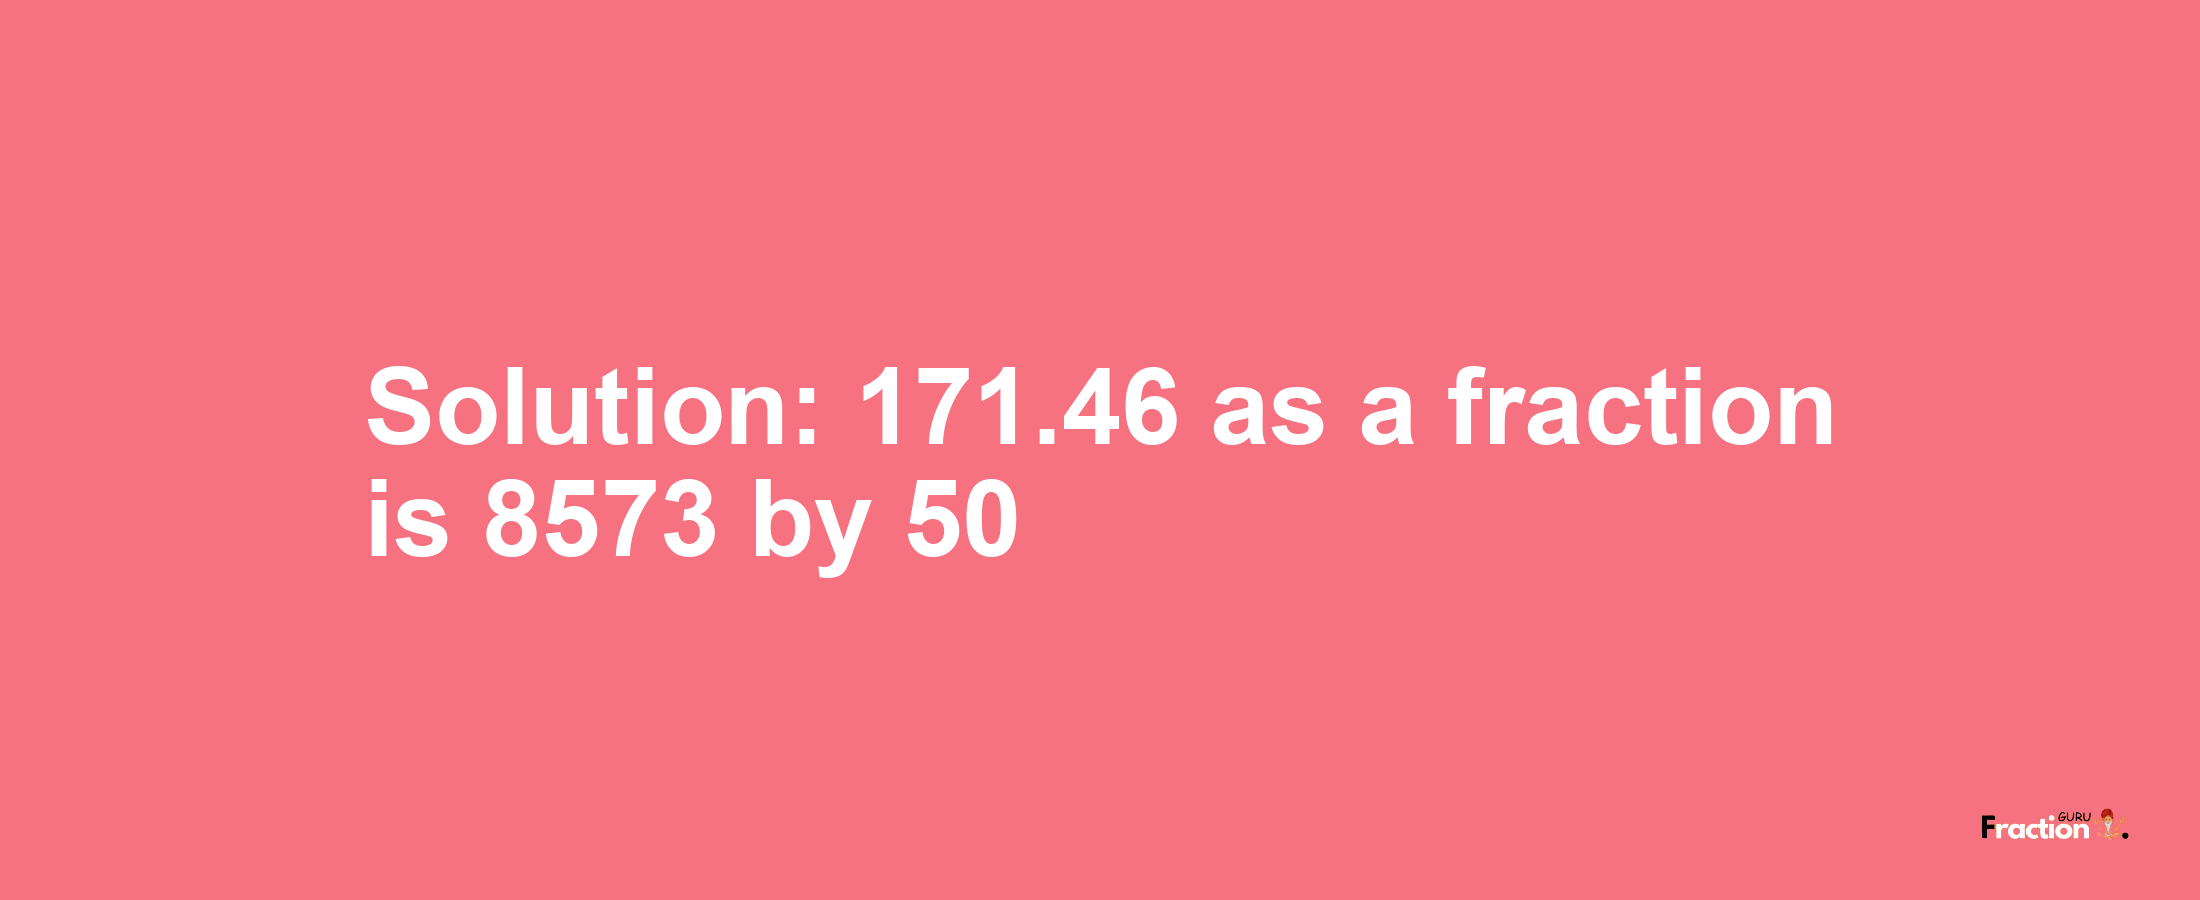 Solution:171.46 as a fraction is 8573/50